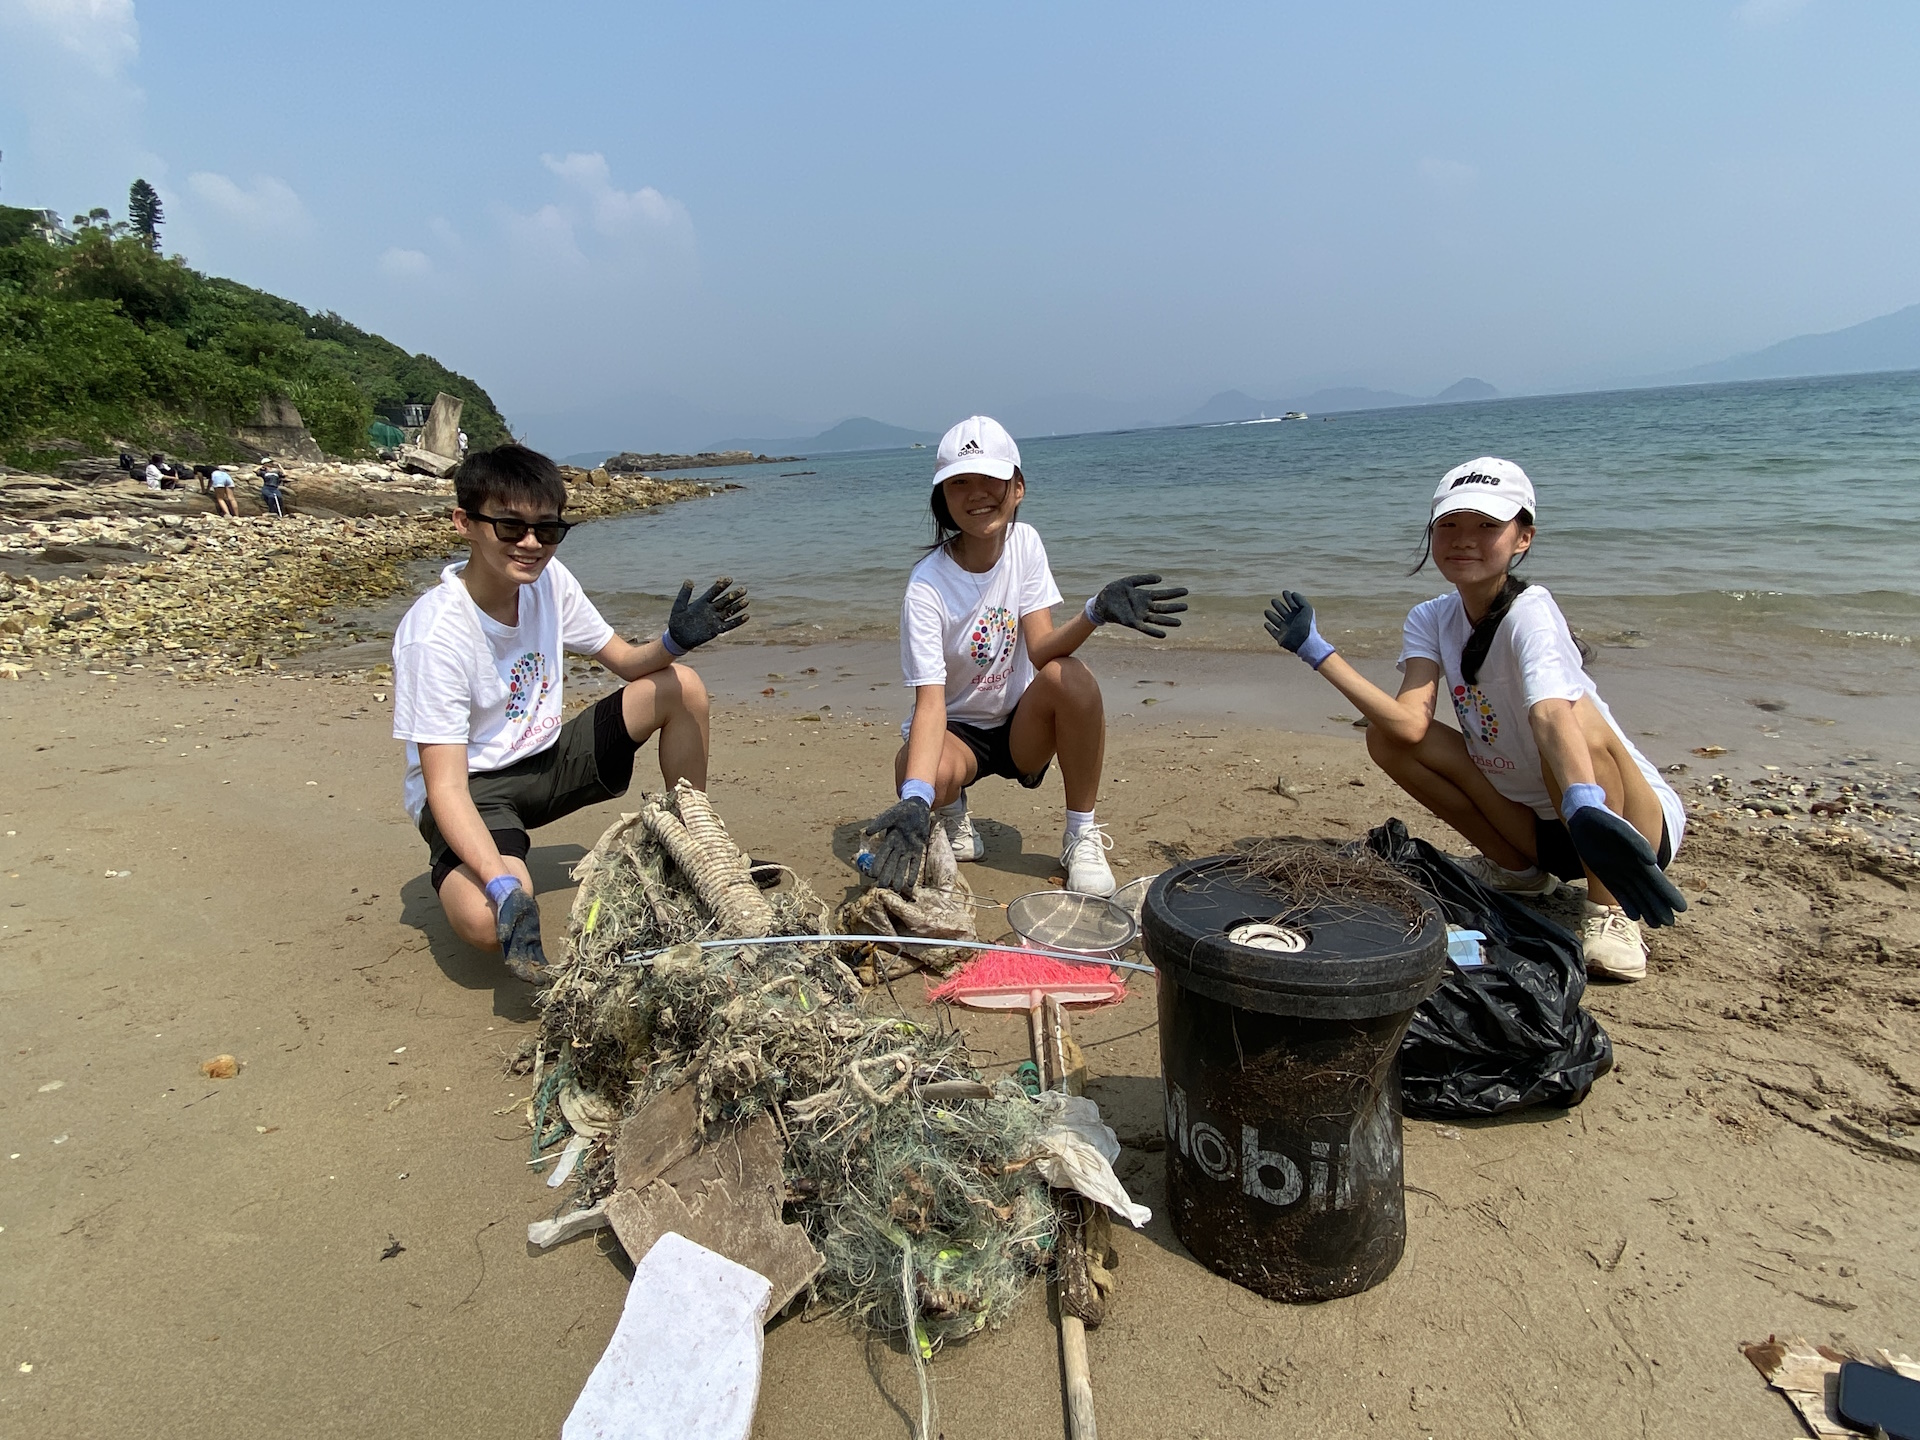 Youth Empowered's environmental team got "hands-on" to organise a coastal clean-up.